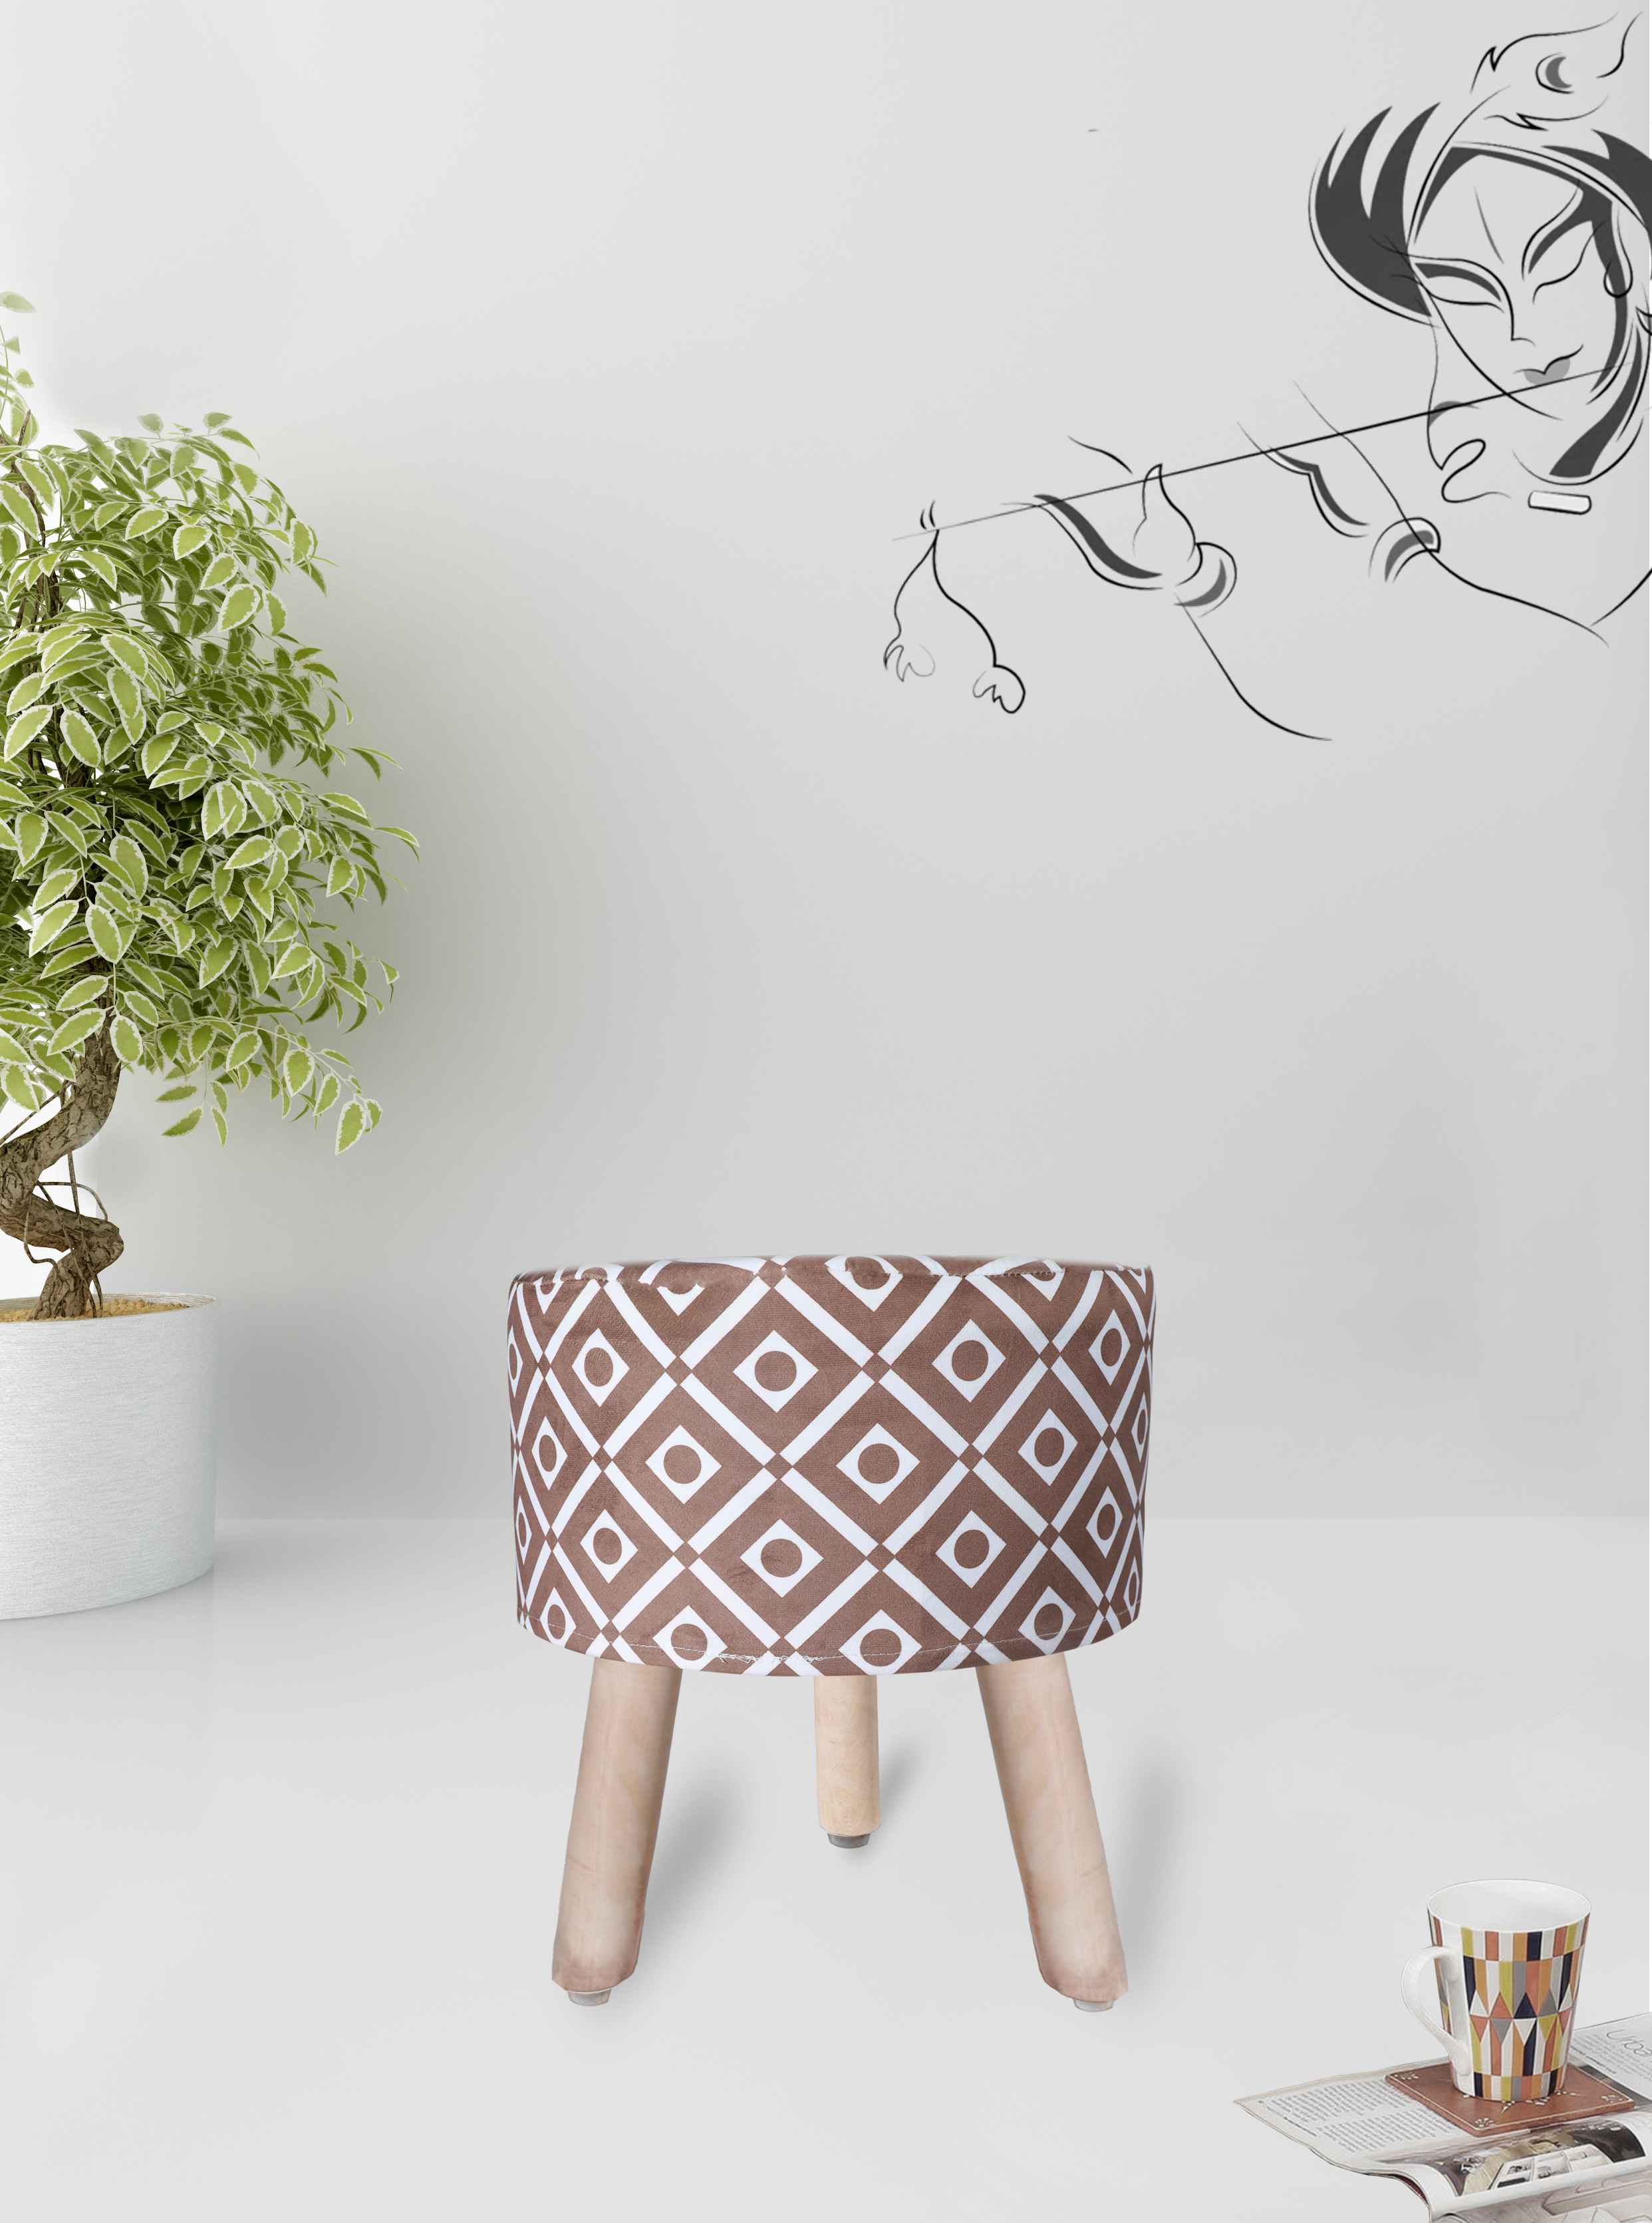 Patterned Paragon Ottomans 6